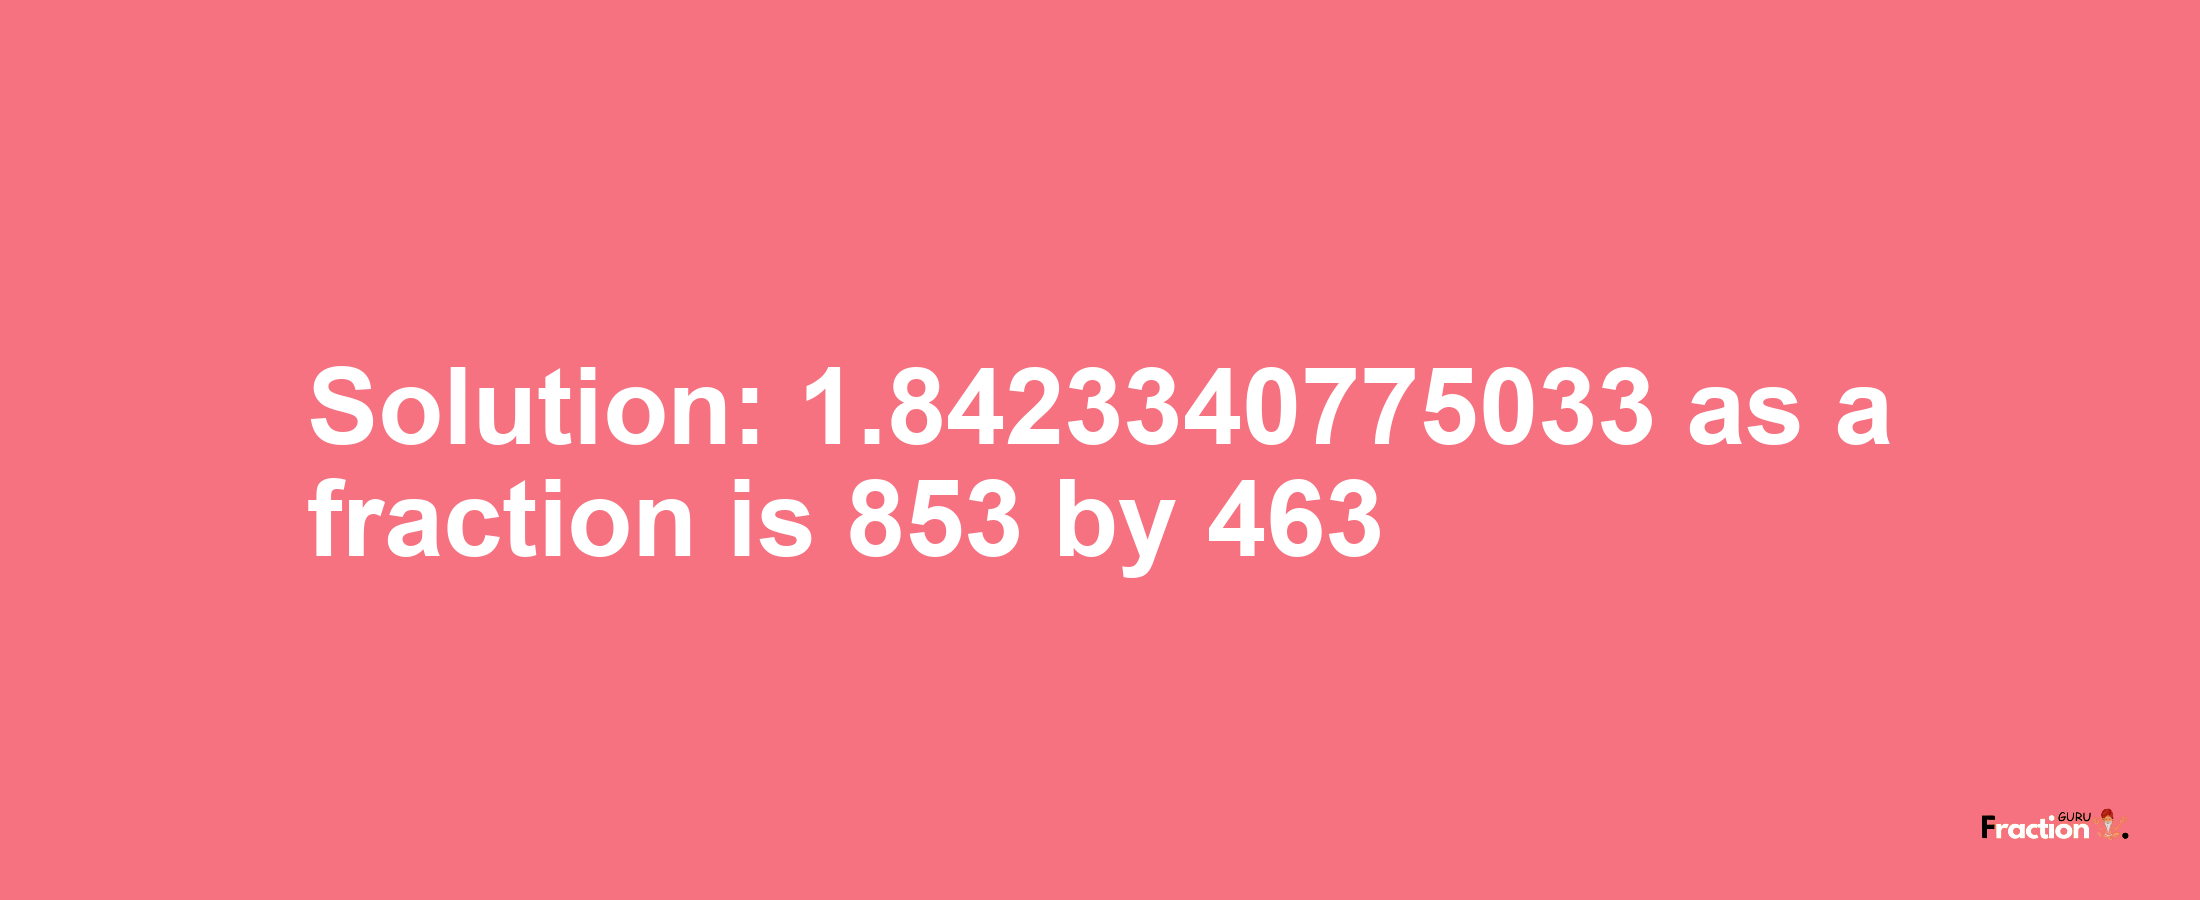 Solution:1.8423340775033 as a fraction is 853/463